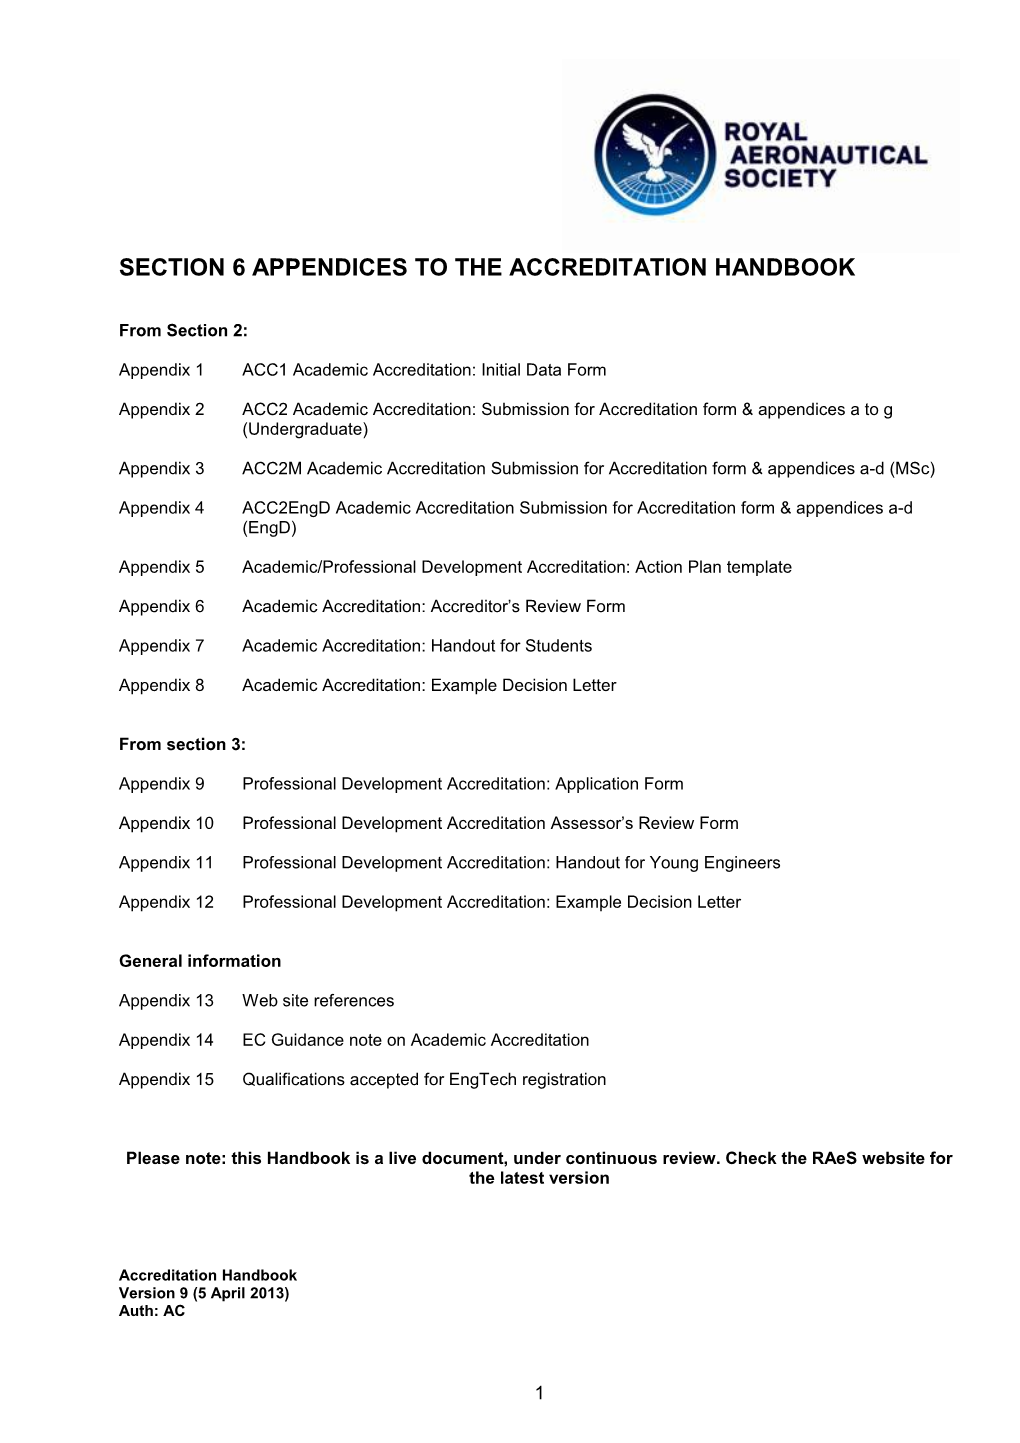 Section 6 Appendices to the Accreditation Handbook